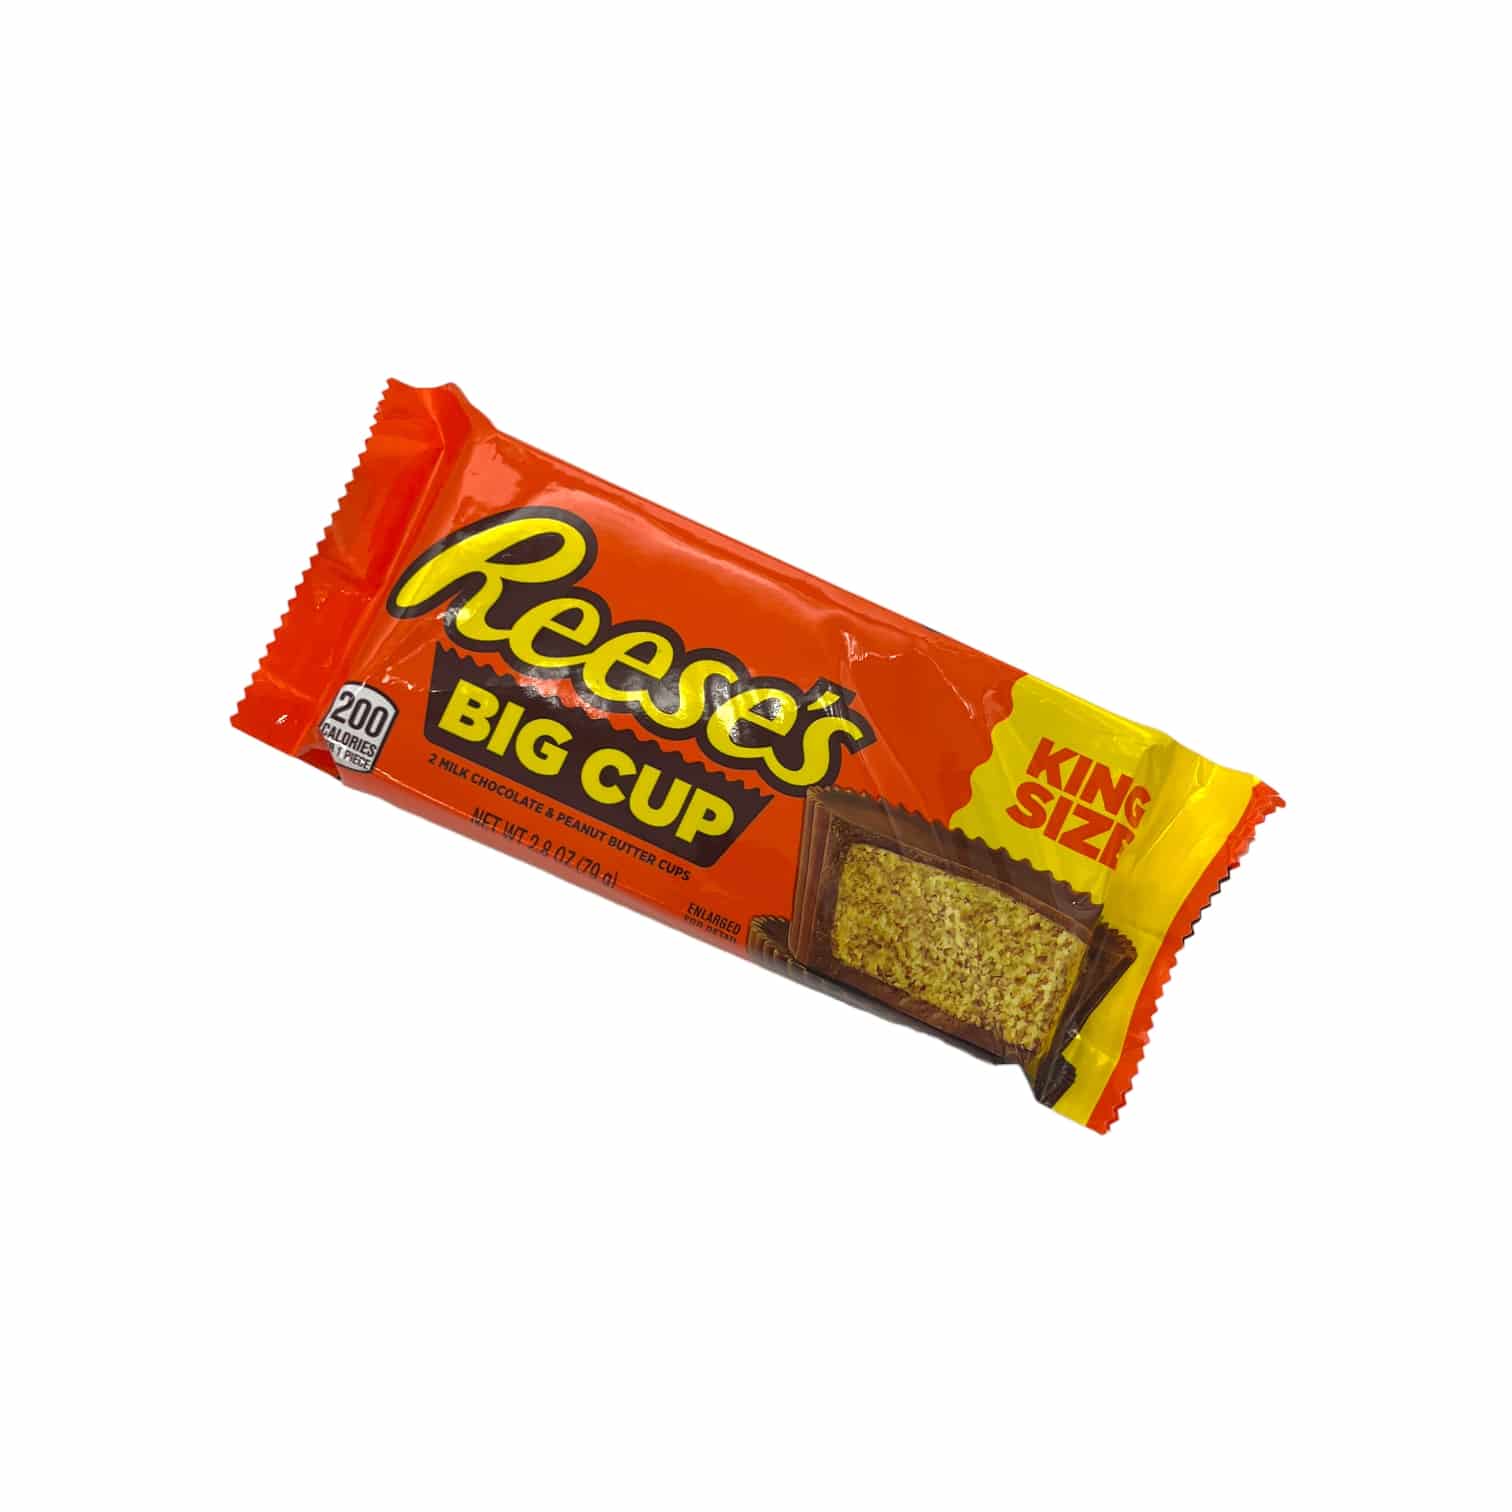 Reeses BigCup King Size 79g